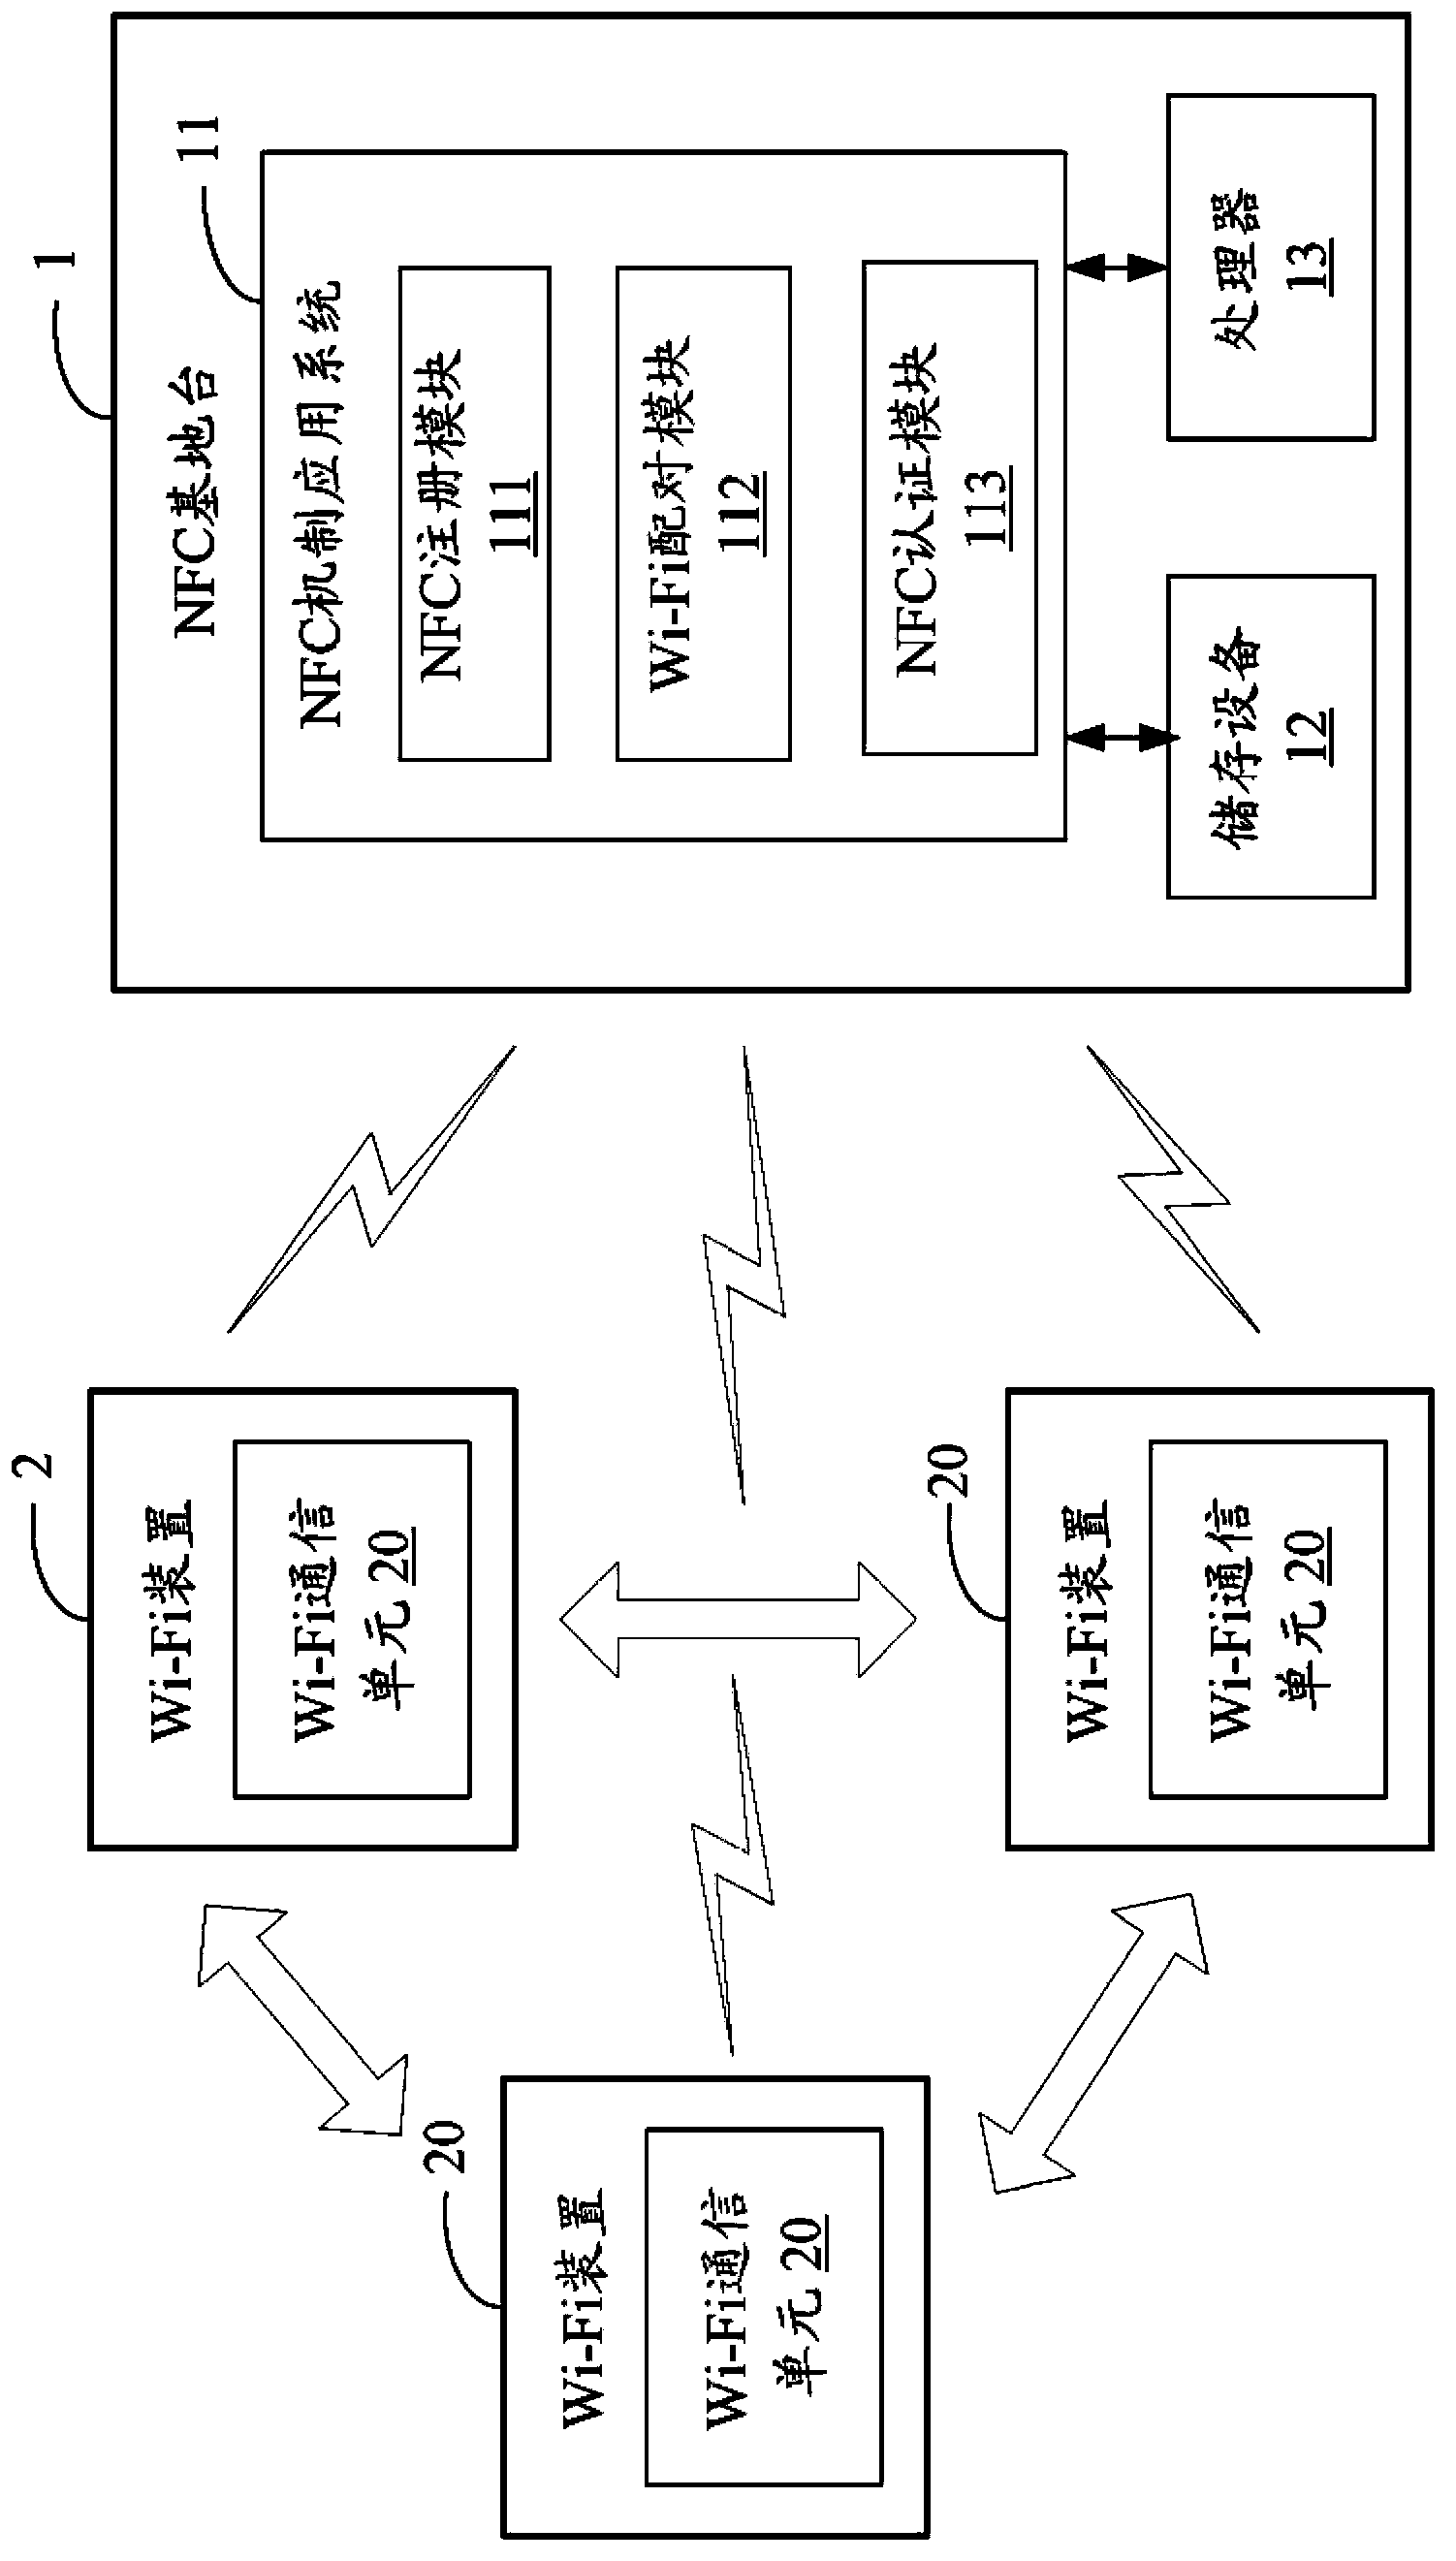 Wi-Fi service and NFC mechanism application system and method